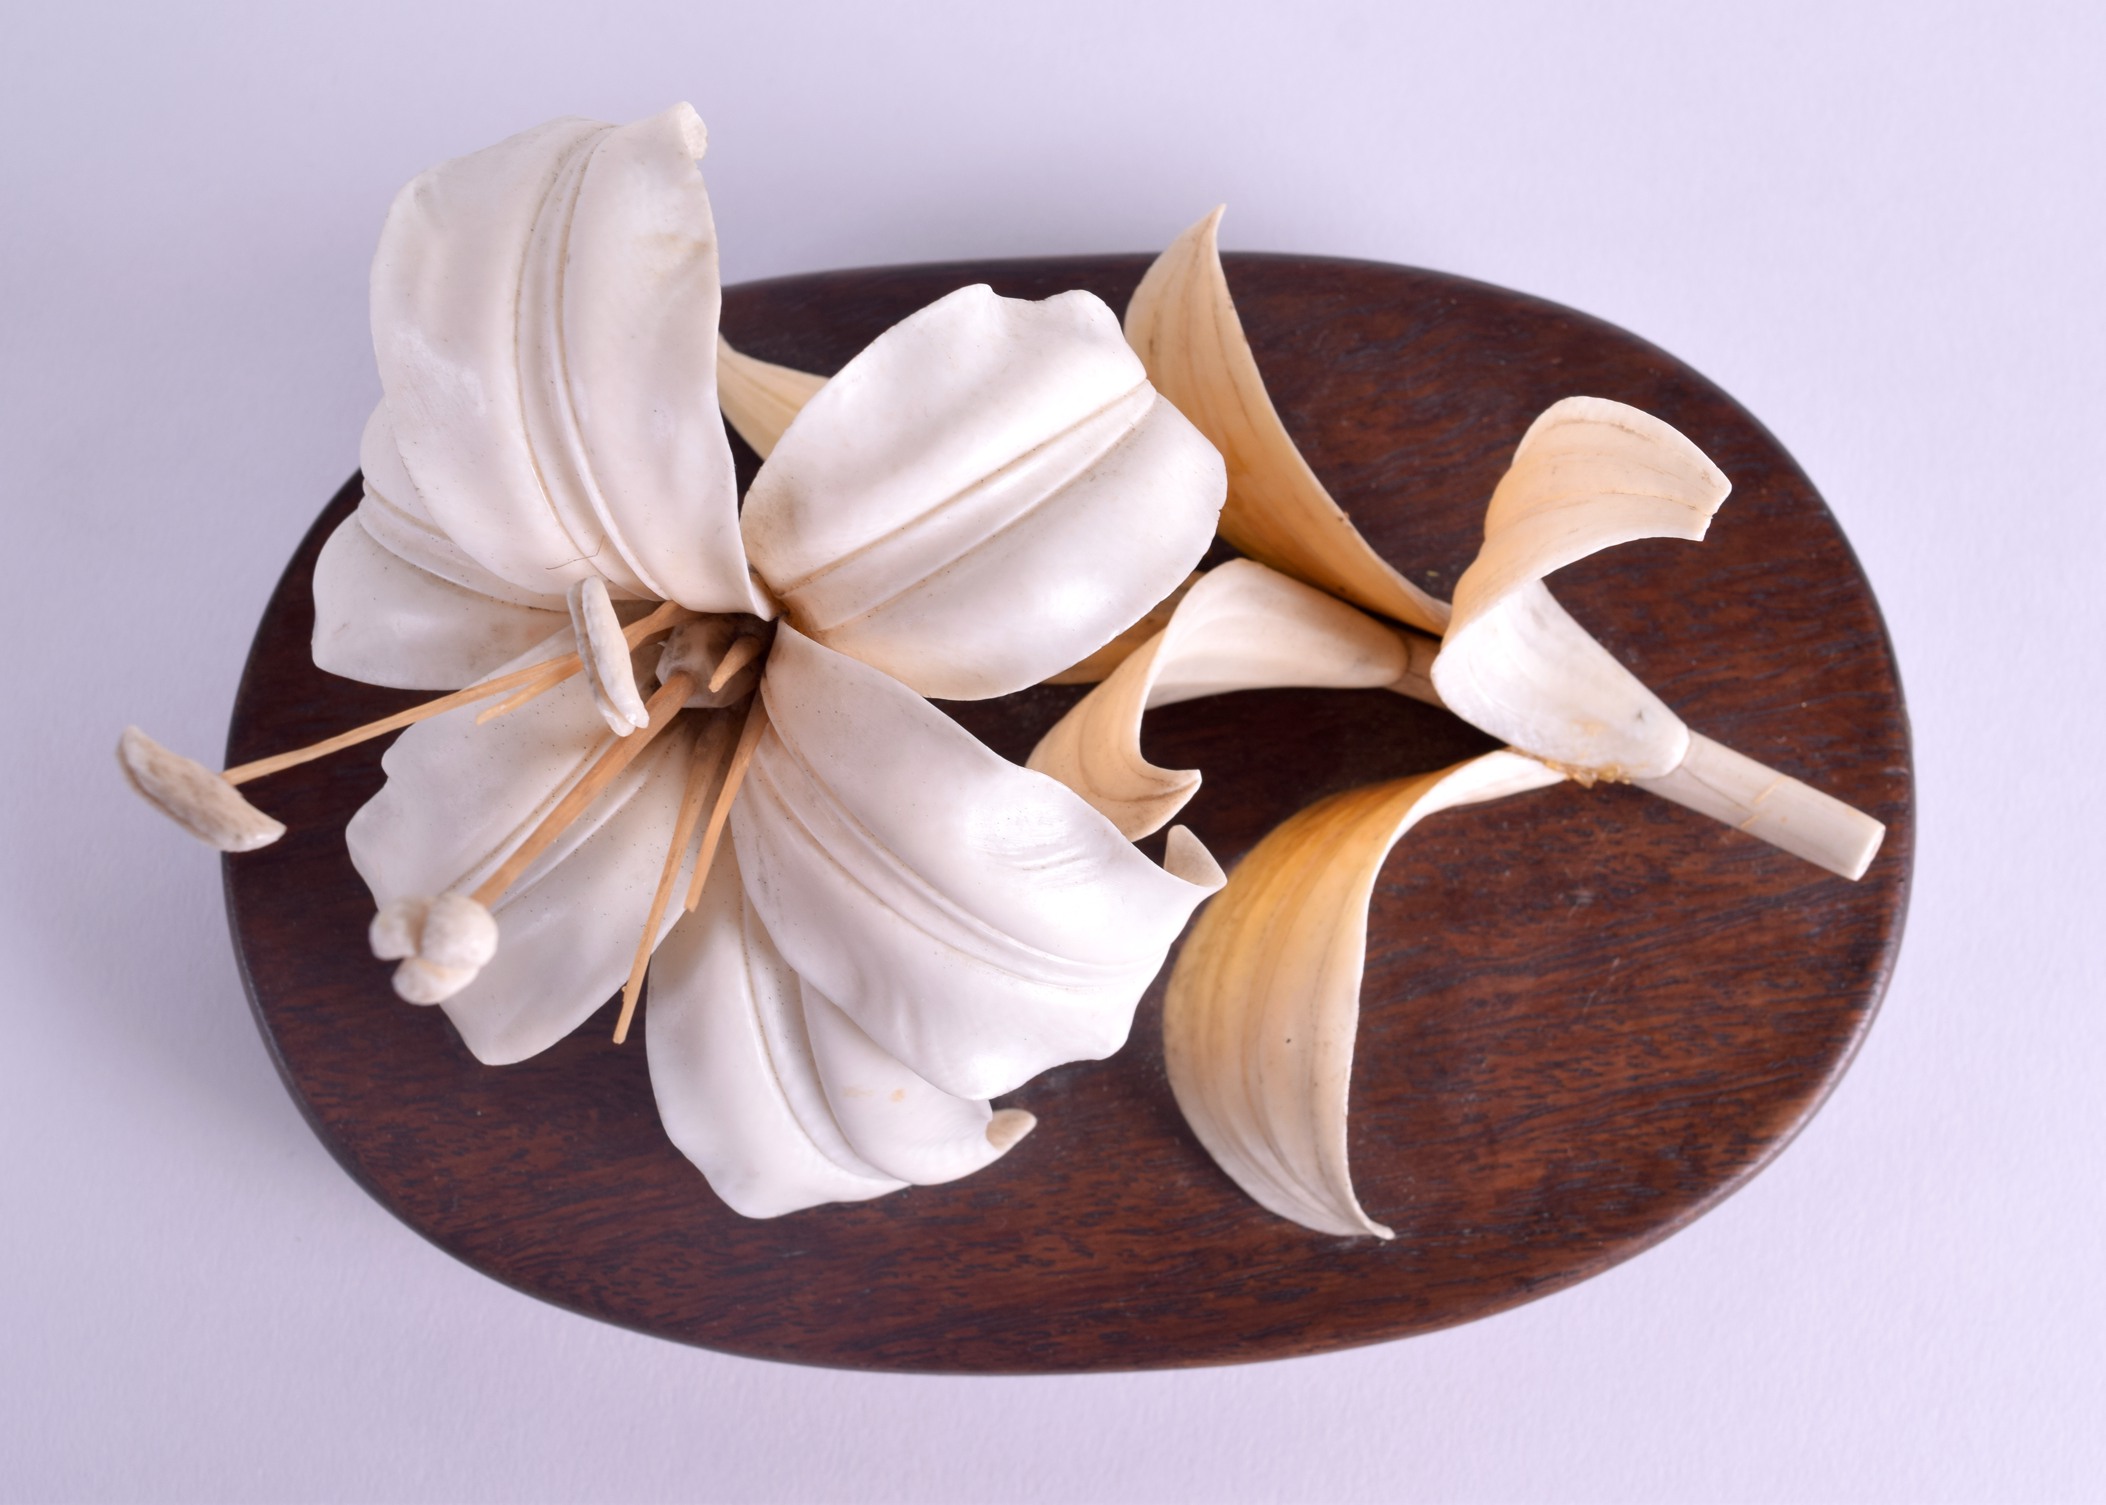 A 19TH CENTURY JAPANESE MEIJI PERIOD POLYCHROMED IVORY OKIMONO modelled as a naturalistic floral - Image 3 of 3